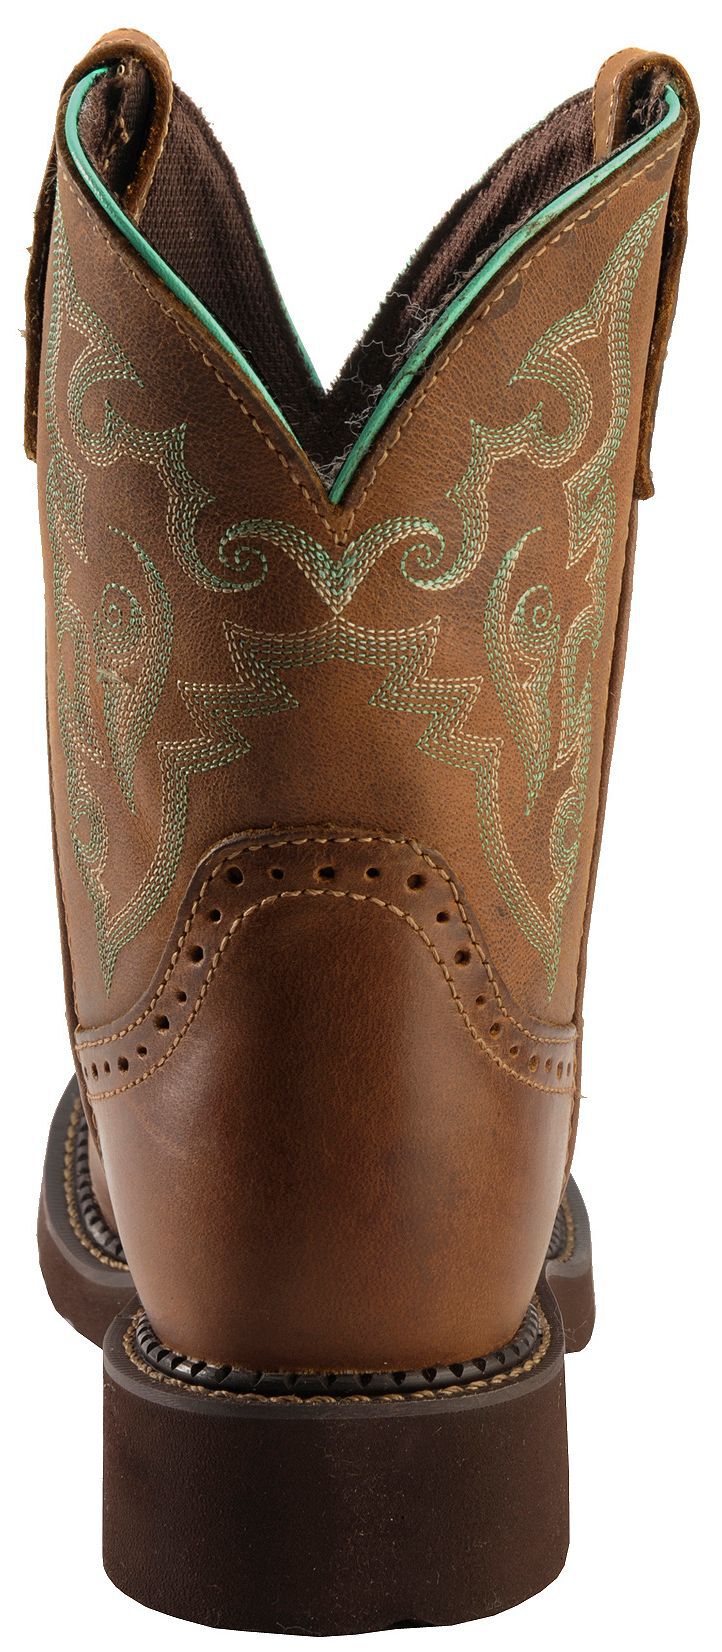 Gemma Brown Cowgirl Boots - Round Toe 